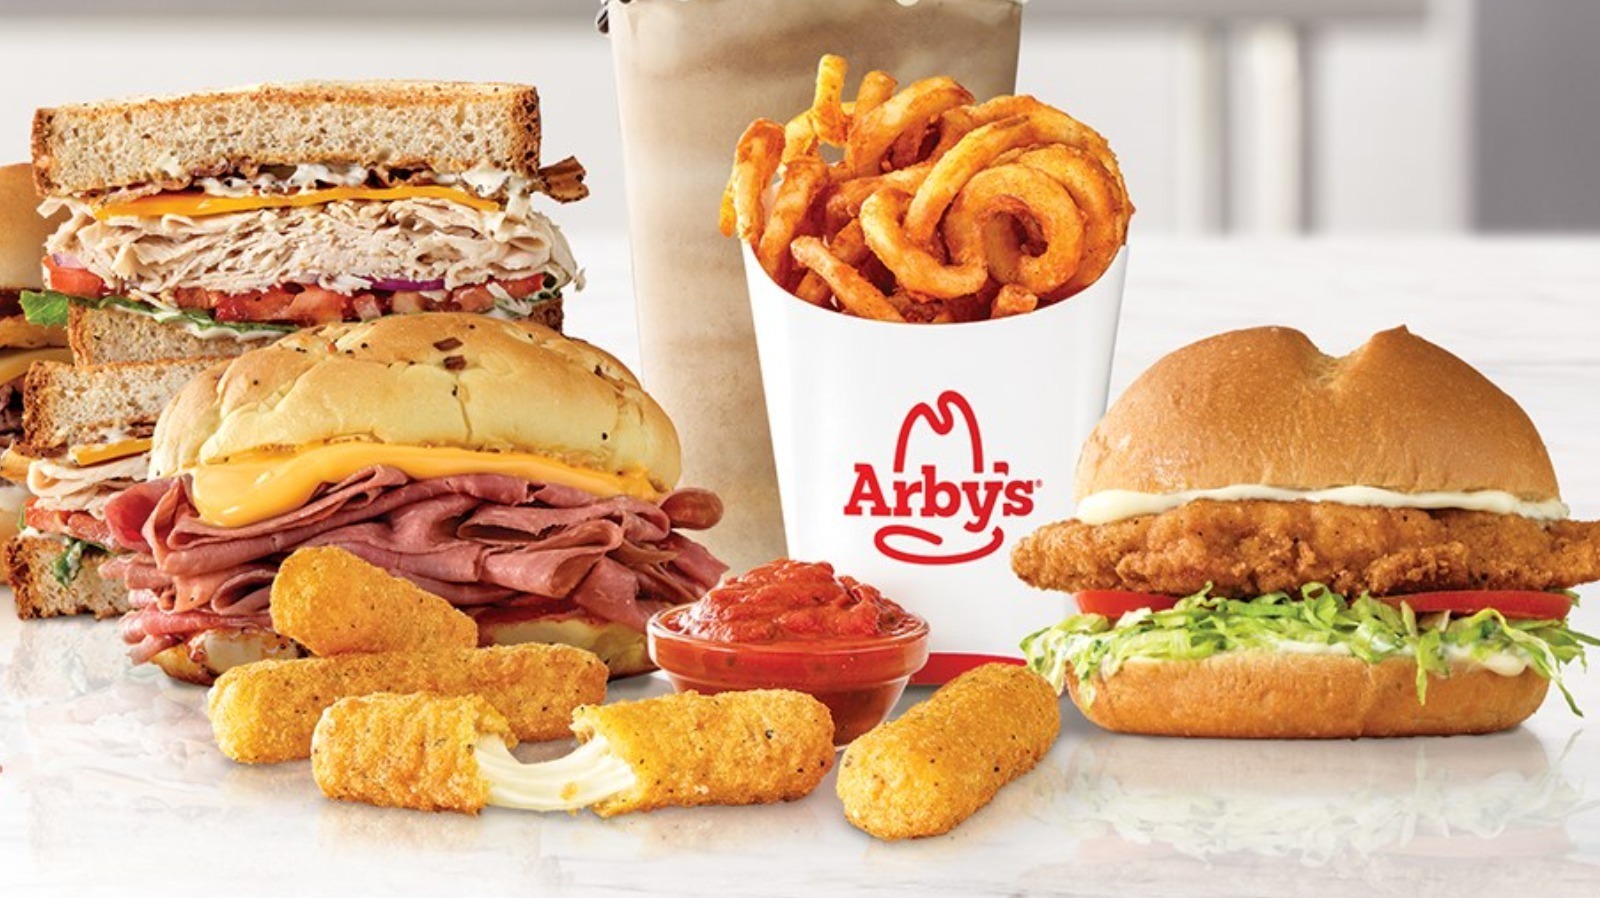 The Popular FastFood Menu Item Arby's Is Finally Offering